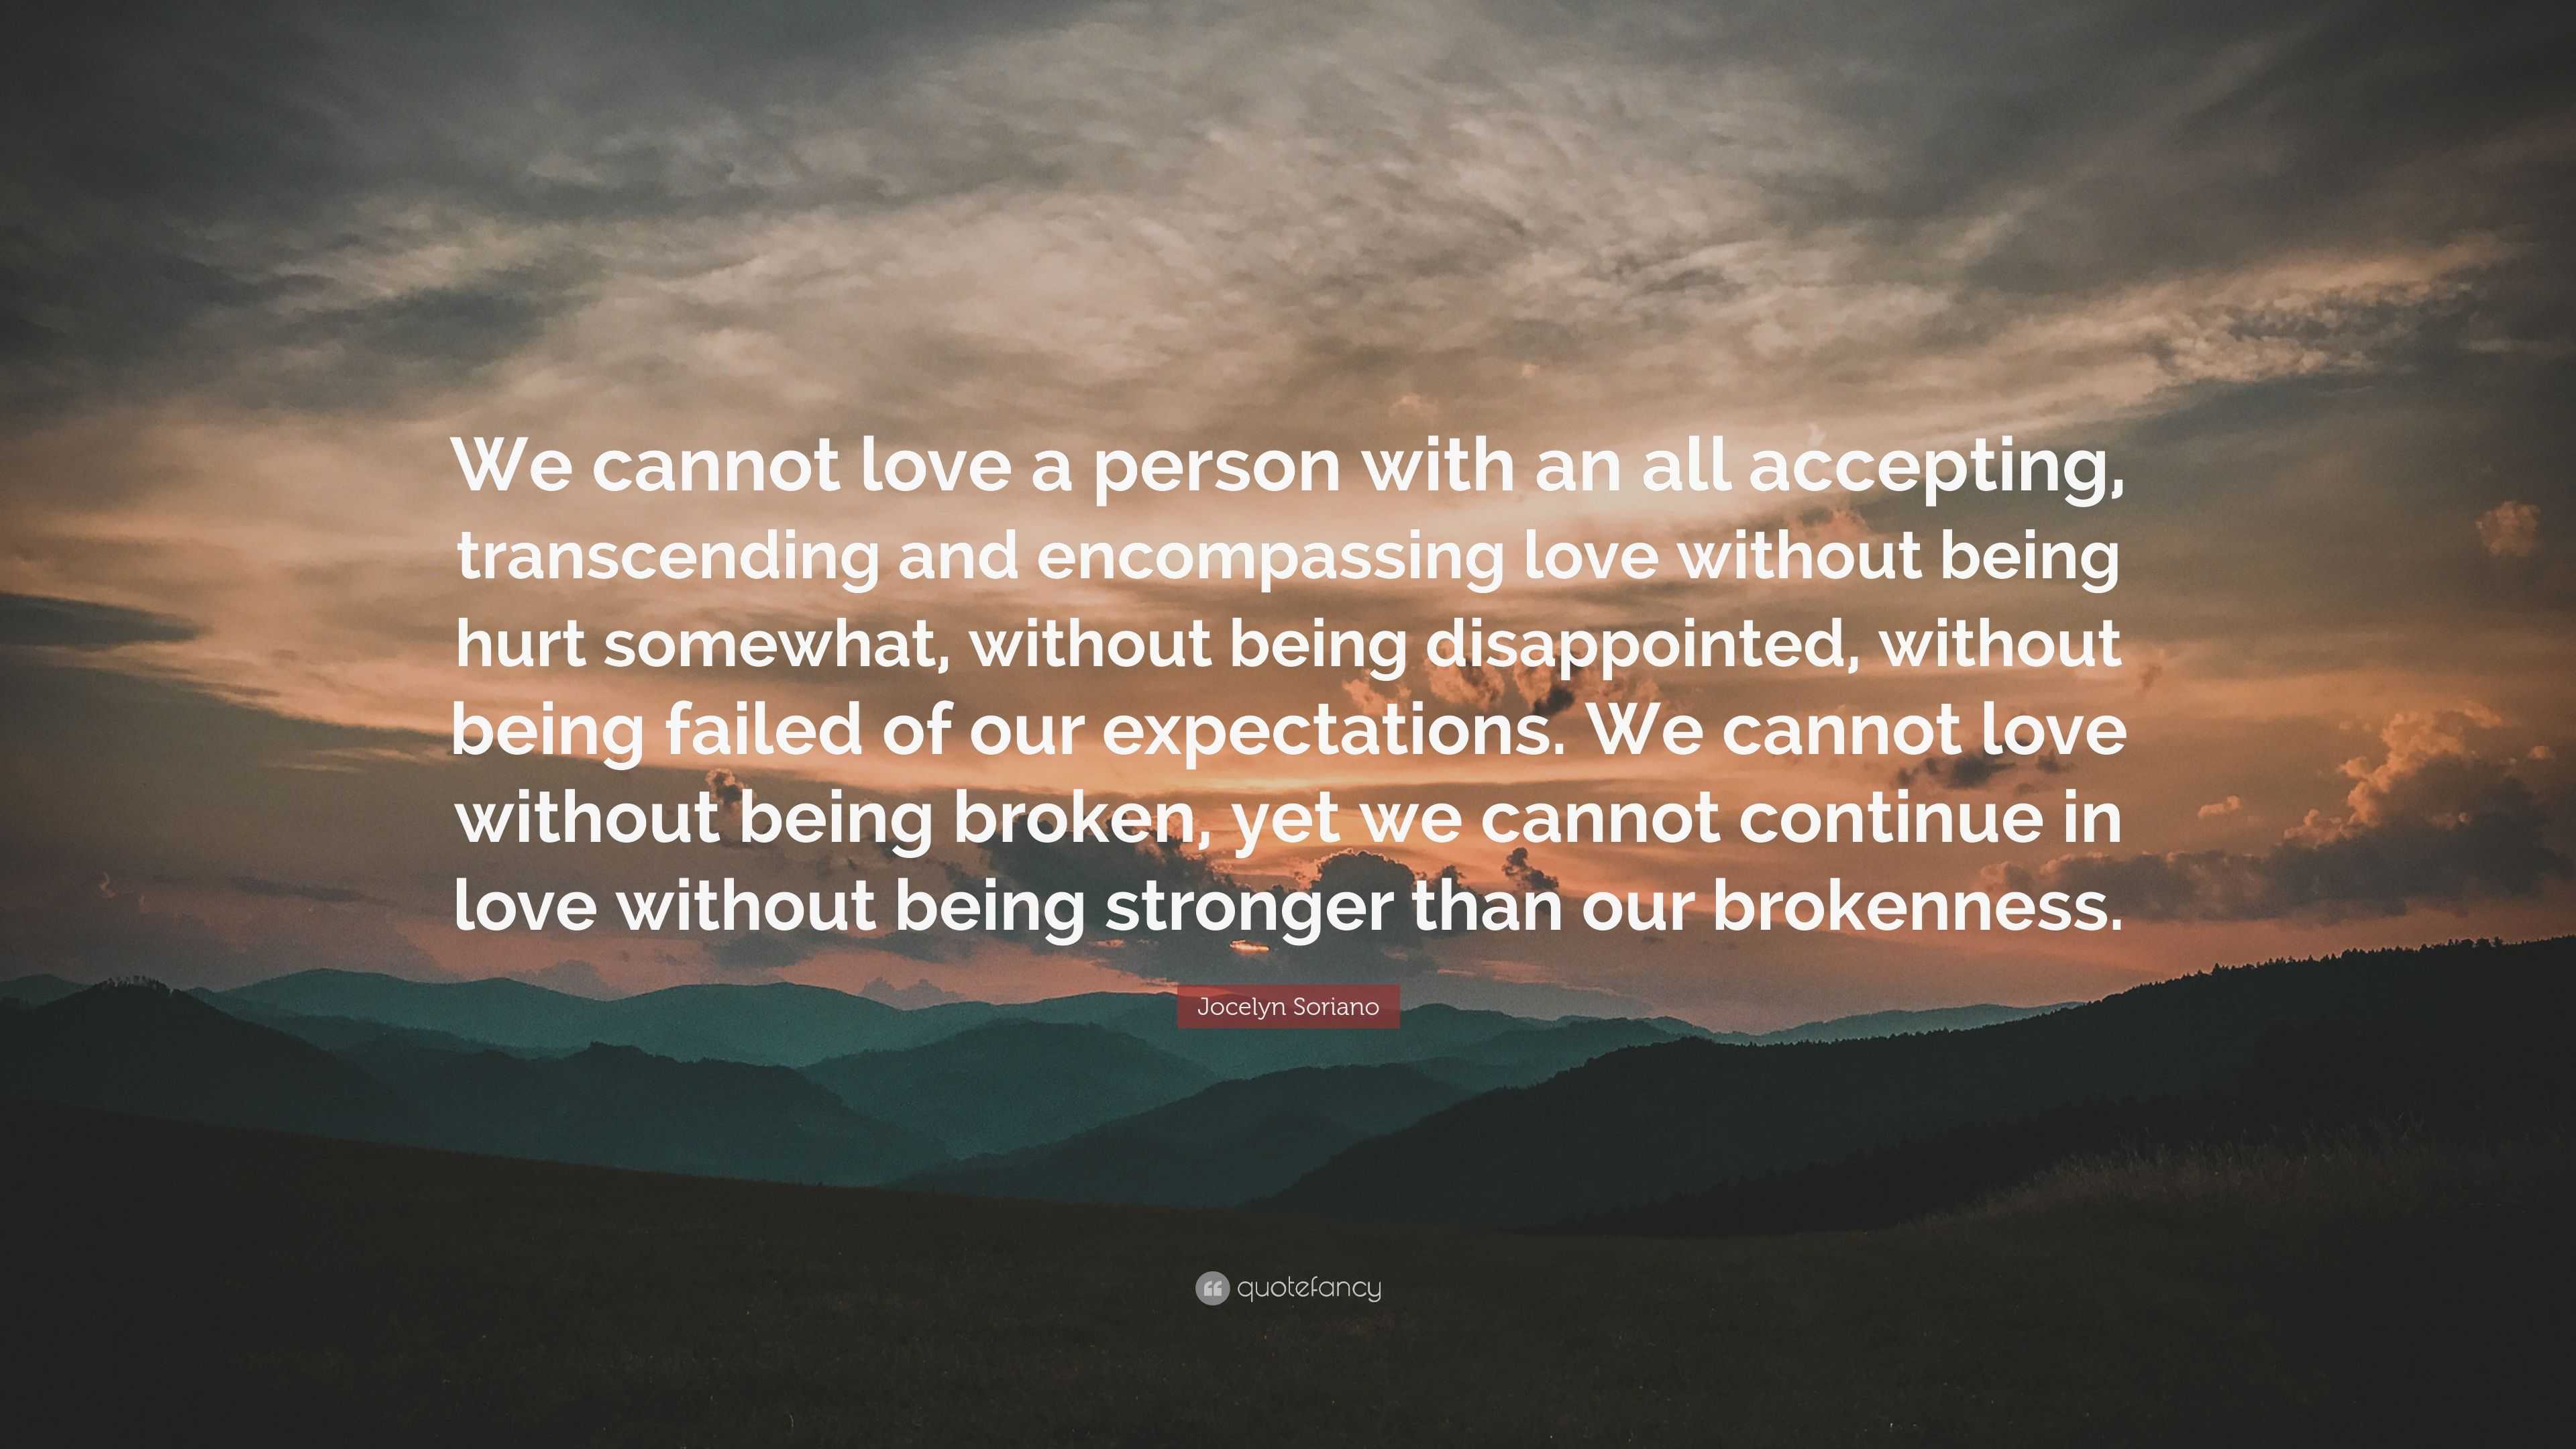 Jocelyn Soriano Quote “We cannot love a person with an all accepting transcending